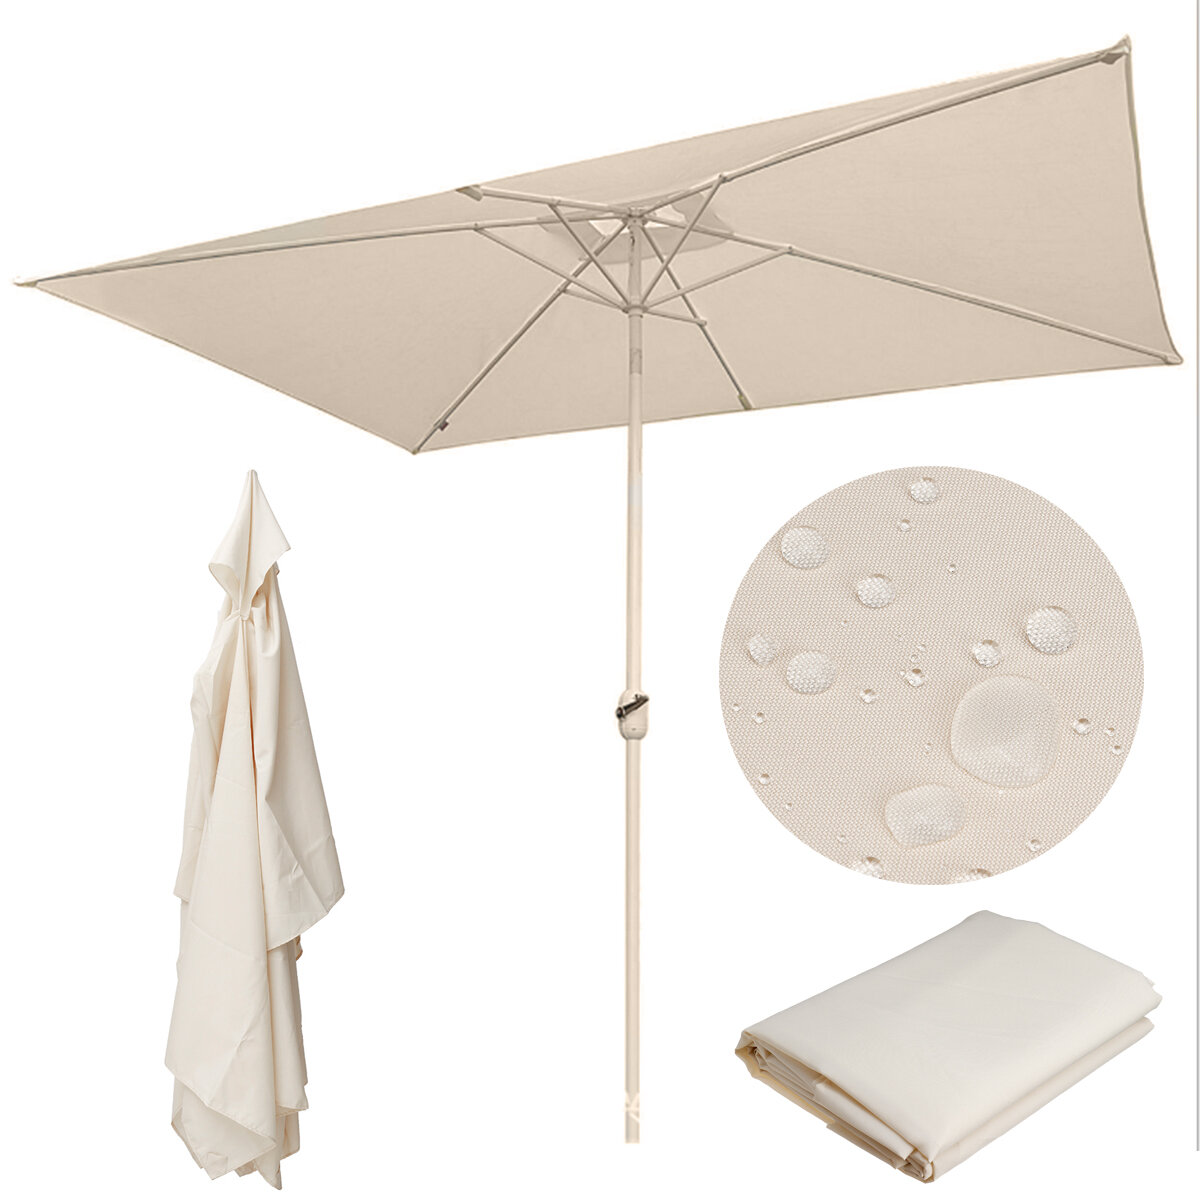 10ft x 6.6ft 6 Ribs Patio Umbrella Canopy Replacement Parasol Sunshade Top Cover Waterproof UV Prote